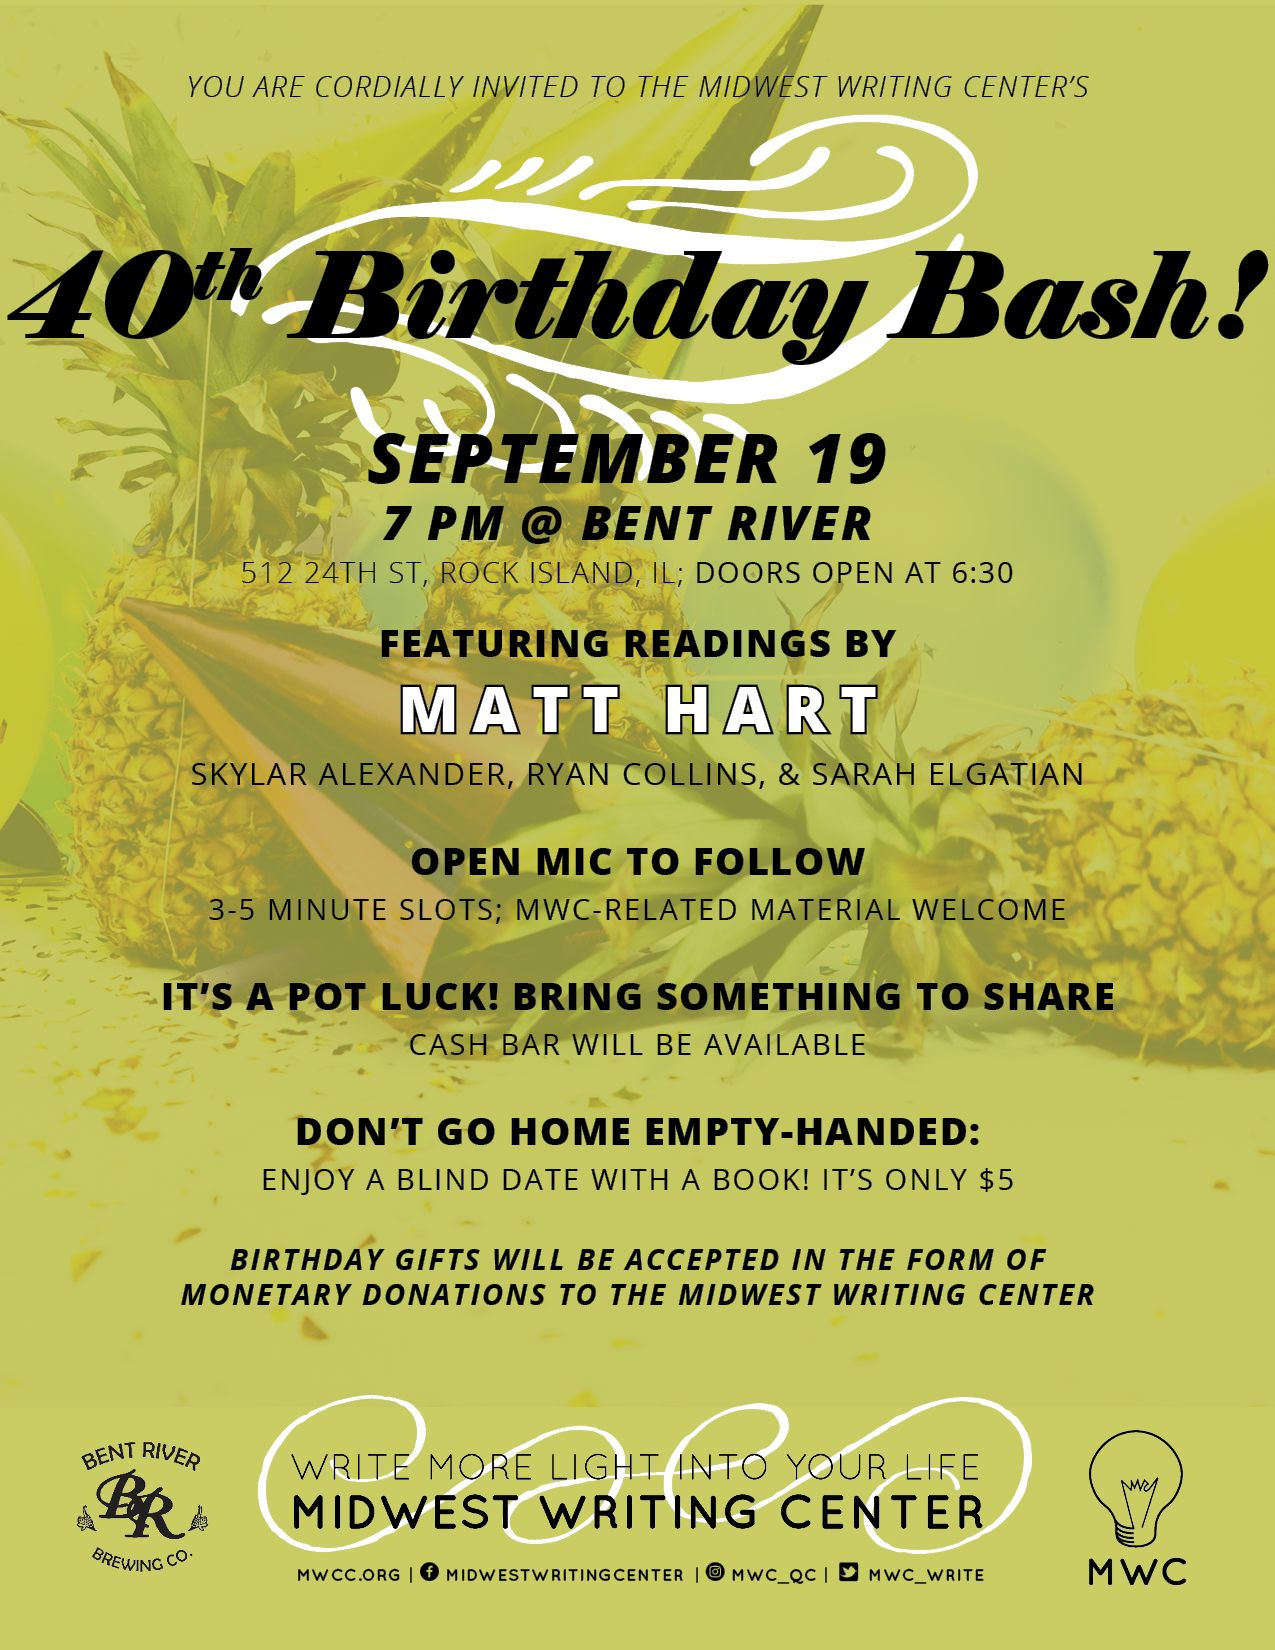 You’re cordially invited to MWC’s 40th Birthday Party! – Midwest